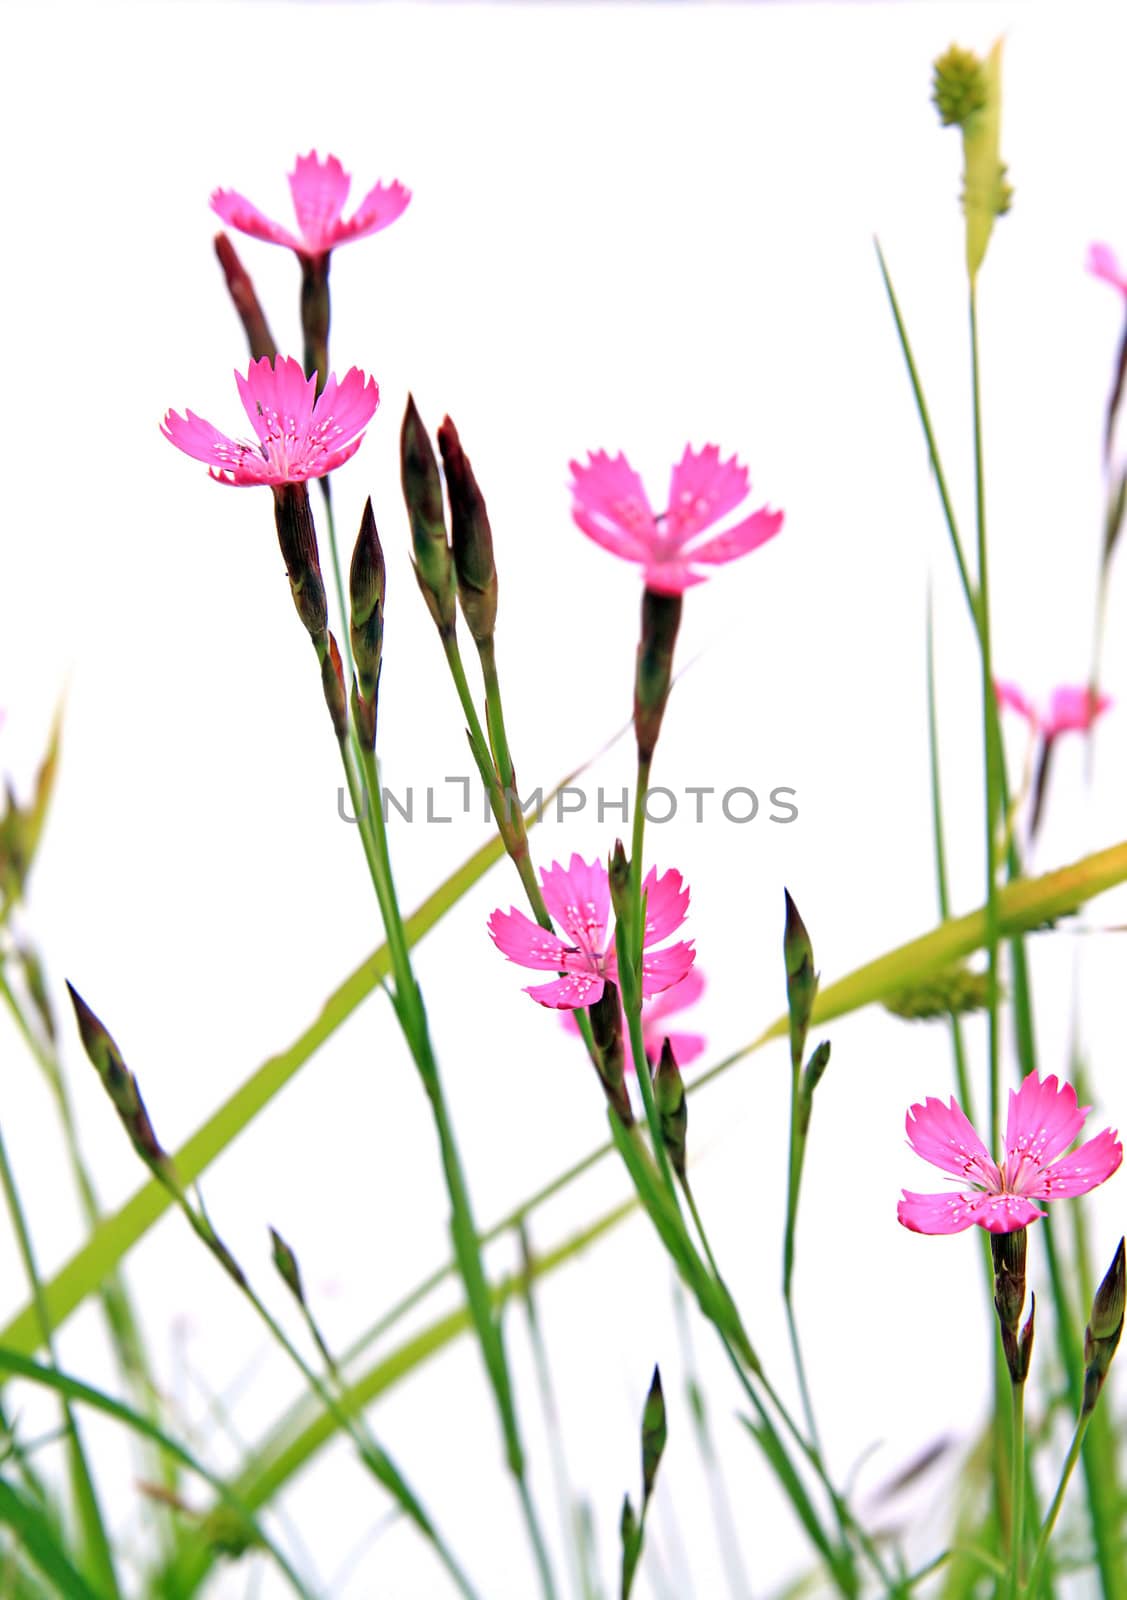 flowerses in herb on white background